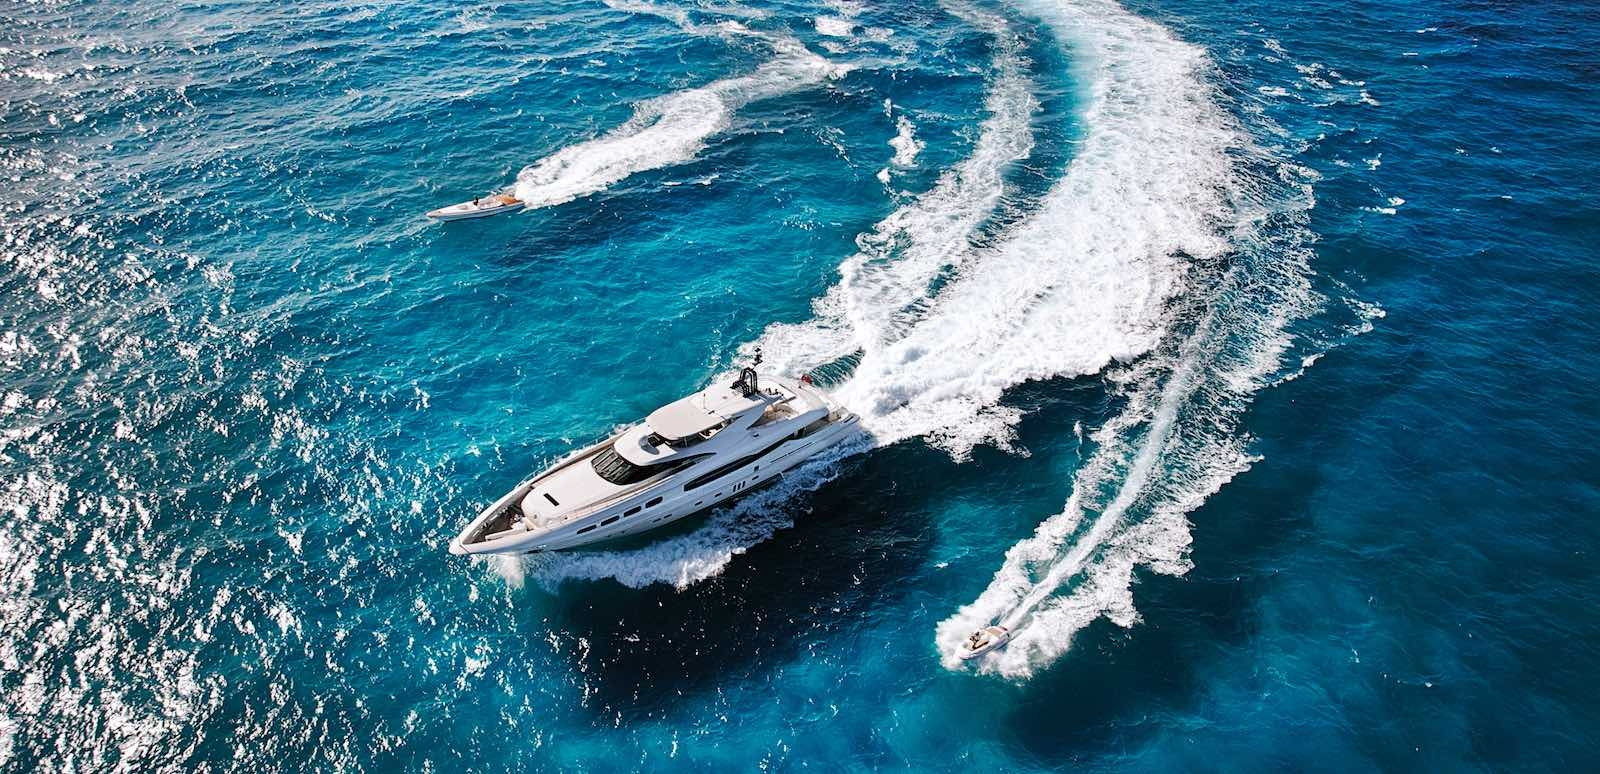 Infinity Pacific Luxury Boat Hire